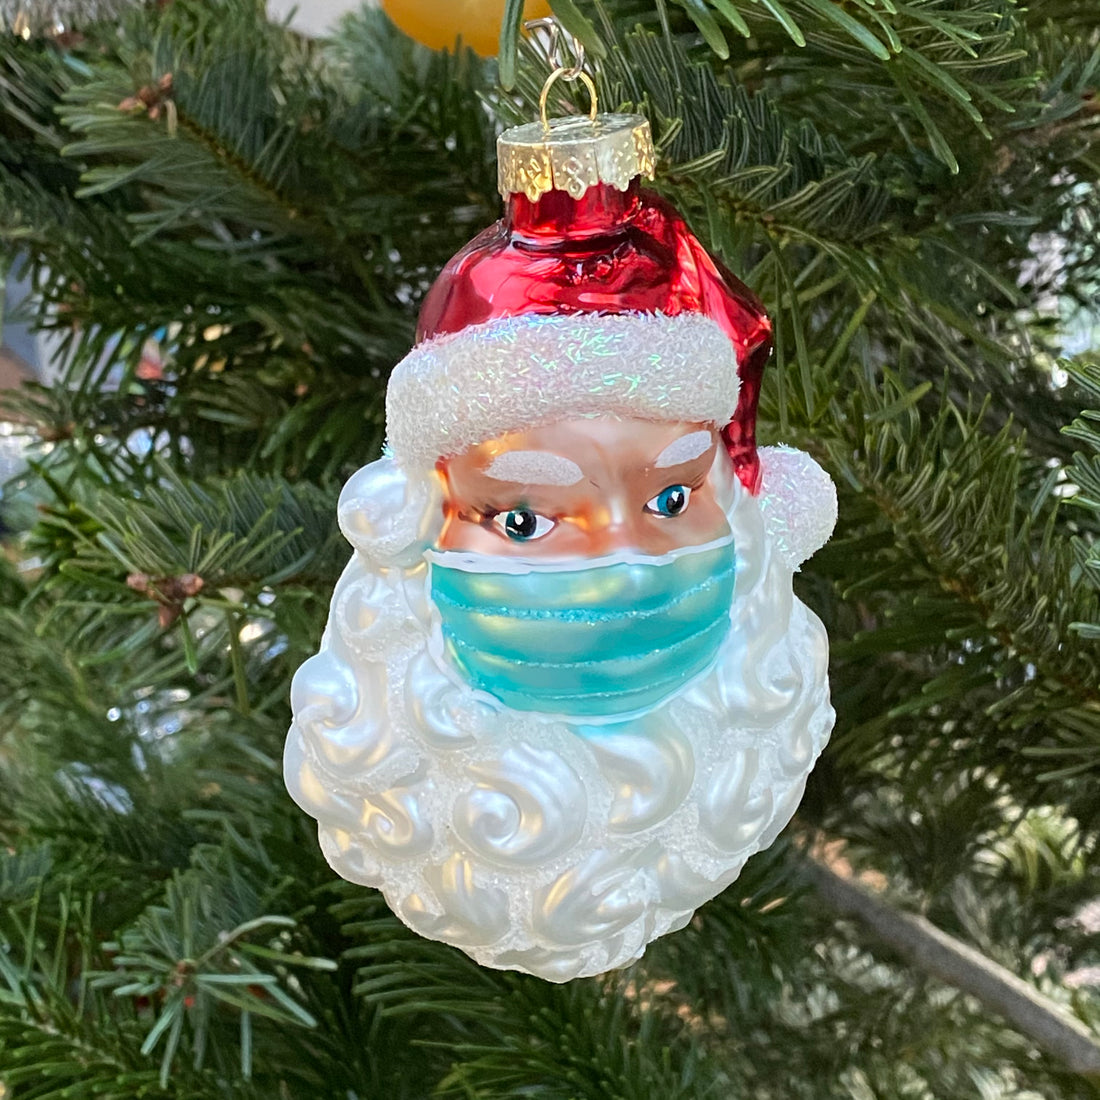 SANTA IN A FACE MASK BAUBLE